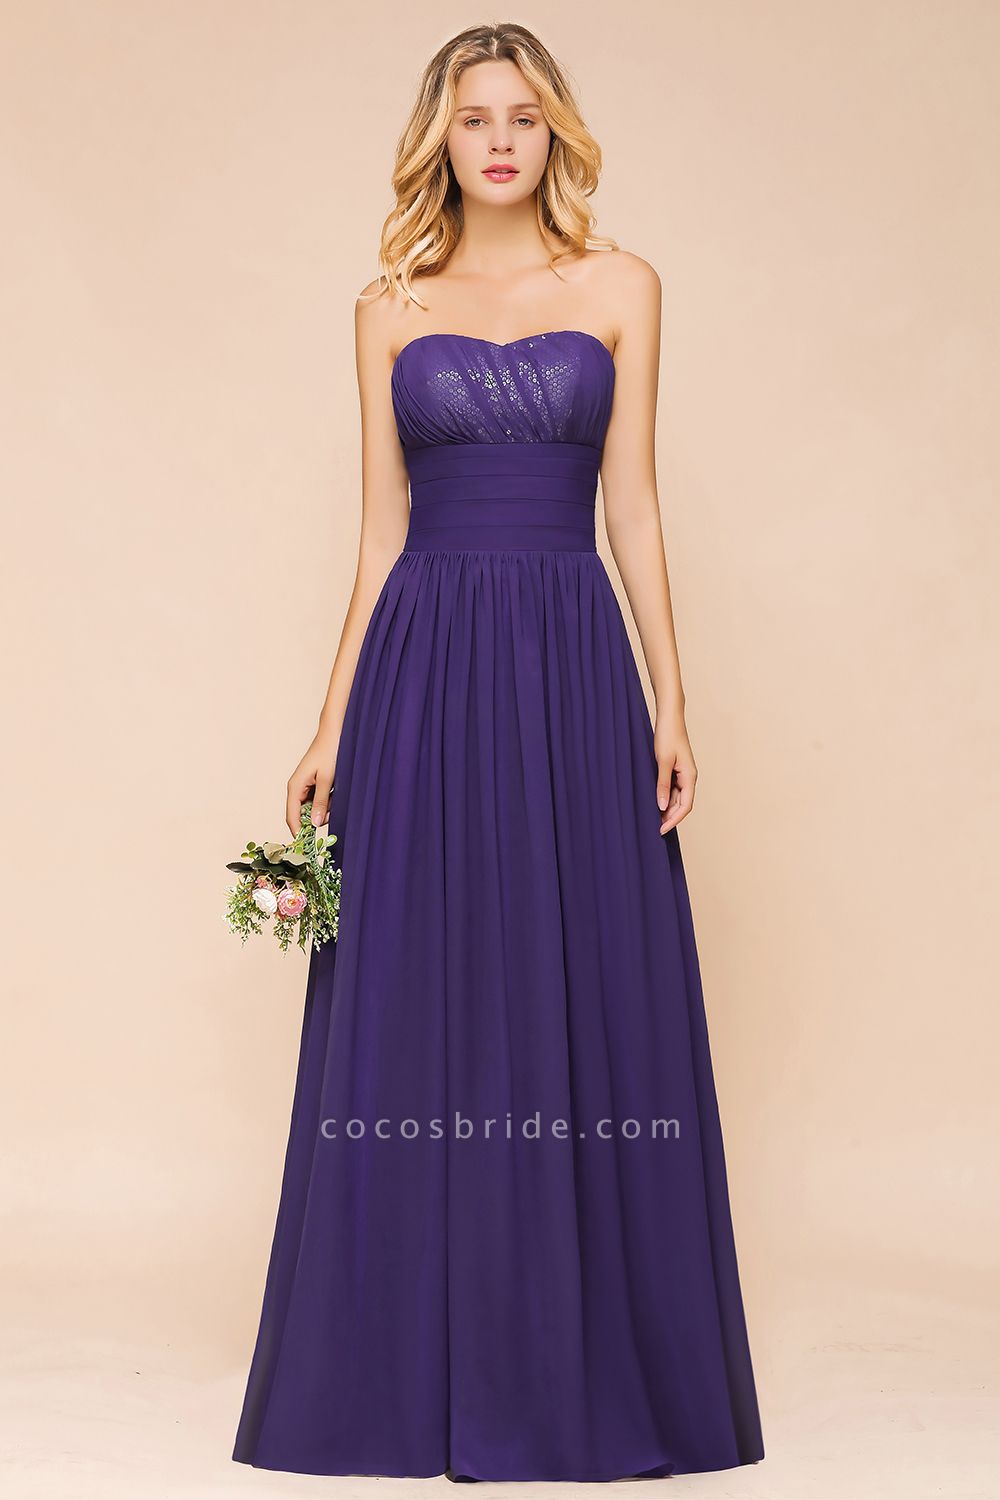 Classy Strapless Open Back A-Line Ruched Bridesmaid Dress With Sequins